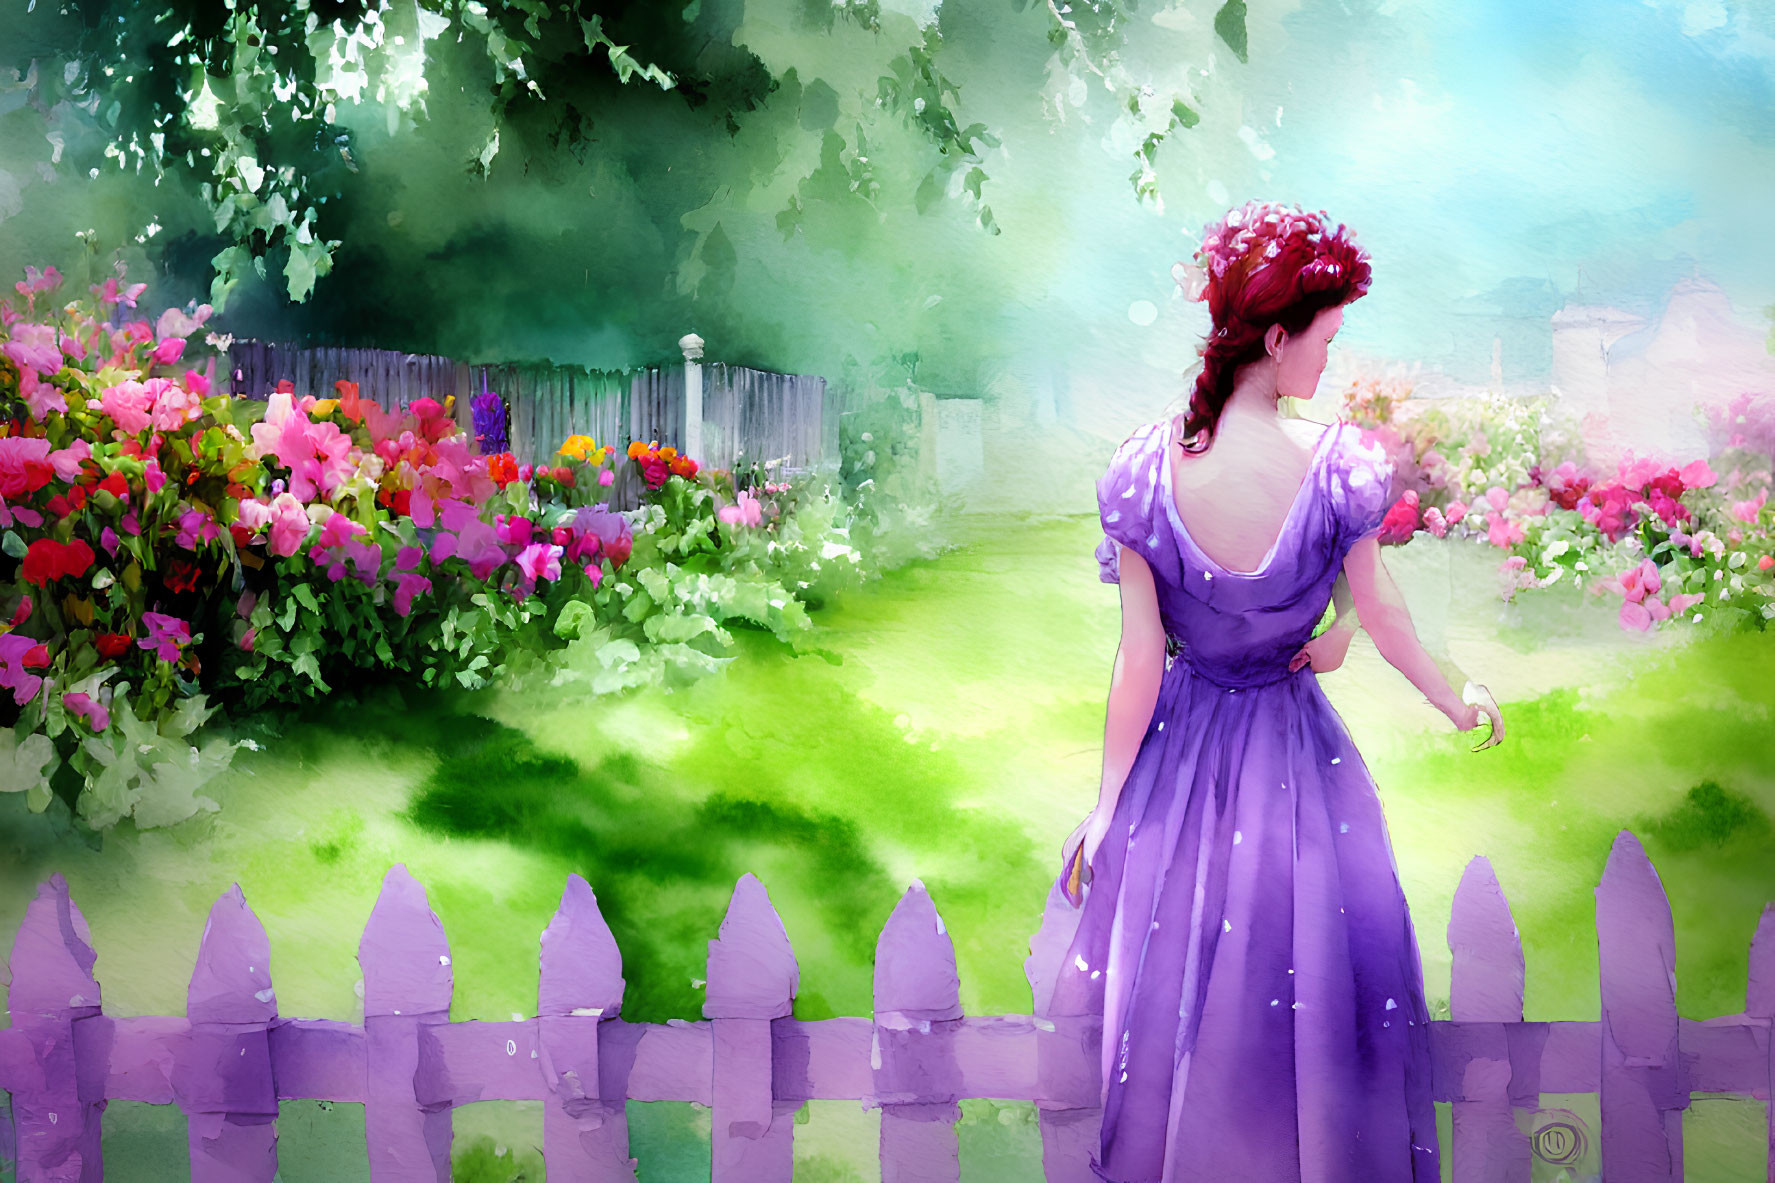 Woman in purple dress with flowers in hair by white picket fence in vibrant garden